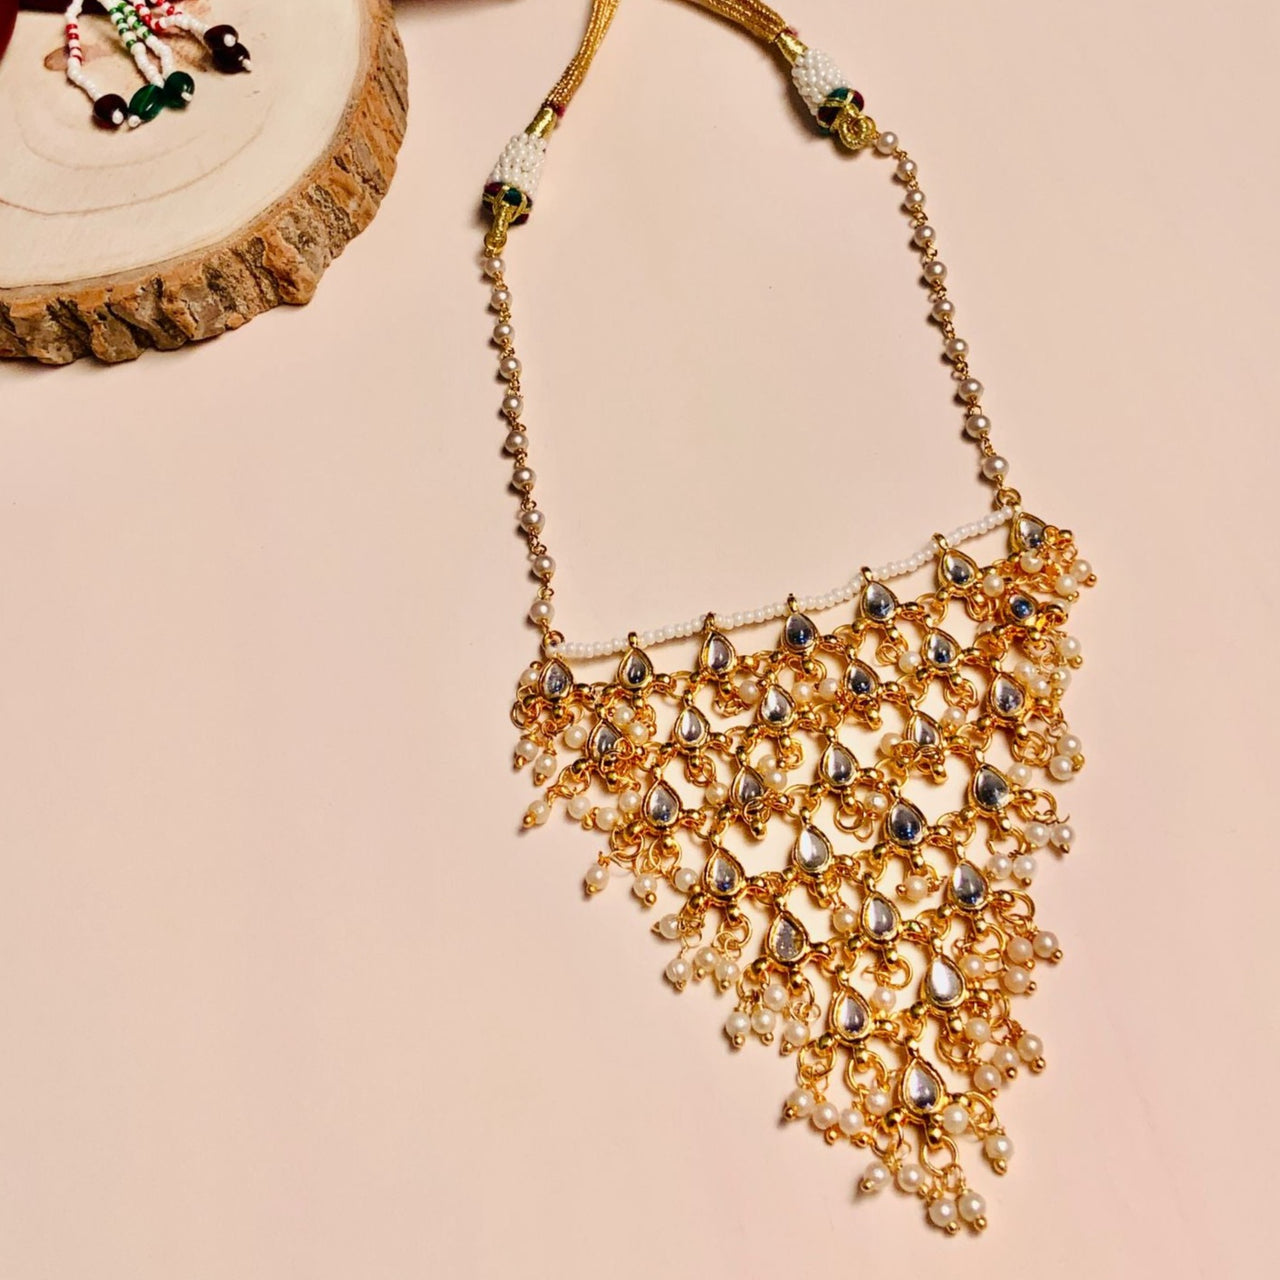 Traditional Rajasthani Necklace